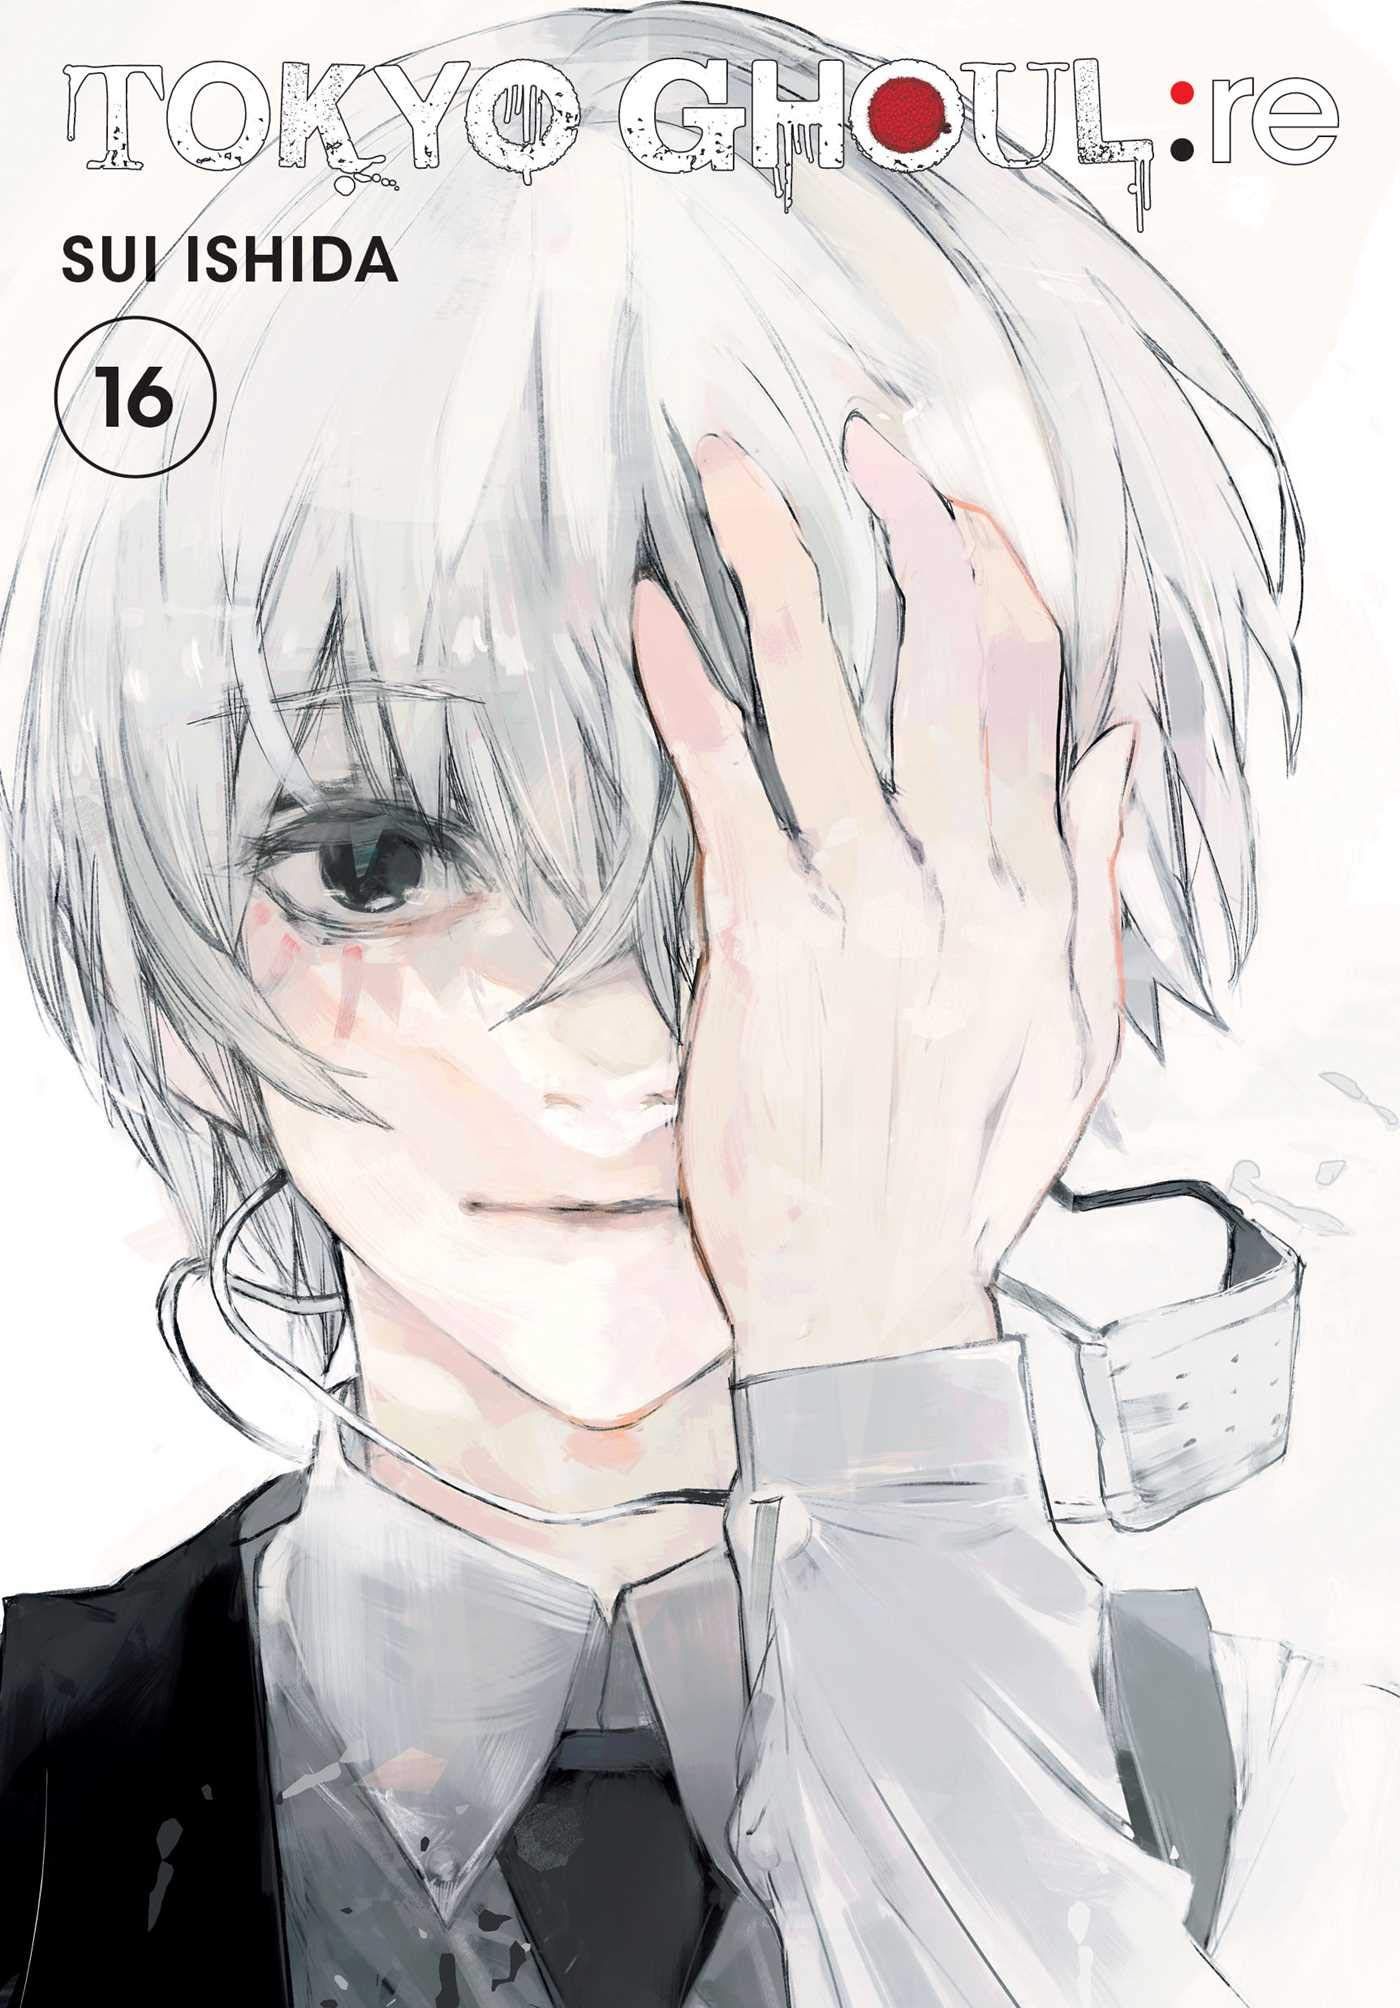 Review Review Tokyo Ghoul Re Vol 16 Is A Bittersweet Ending To The Series